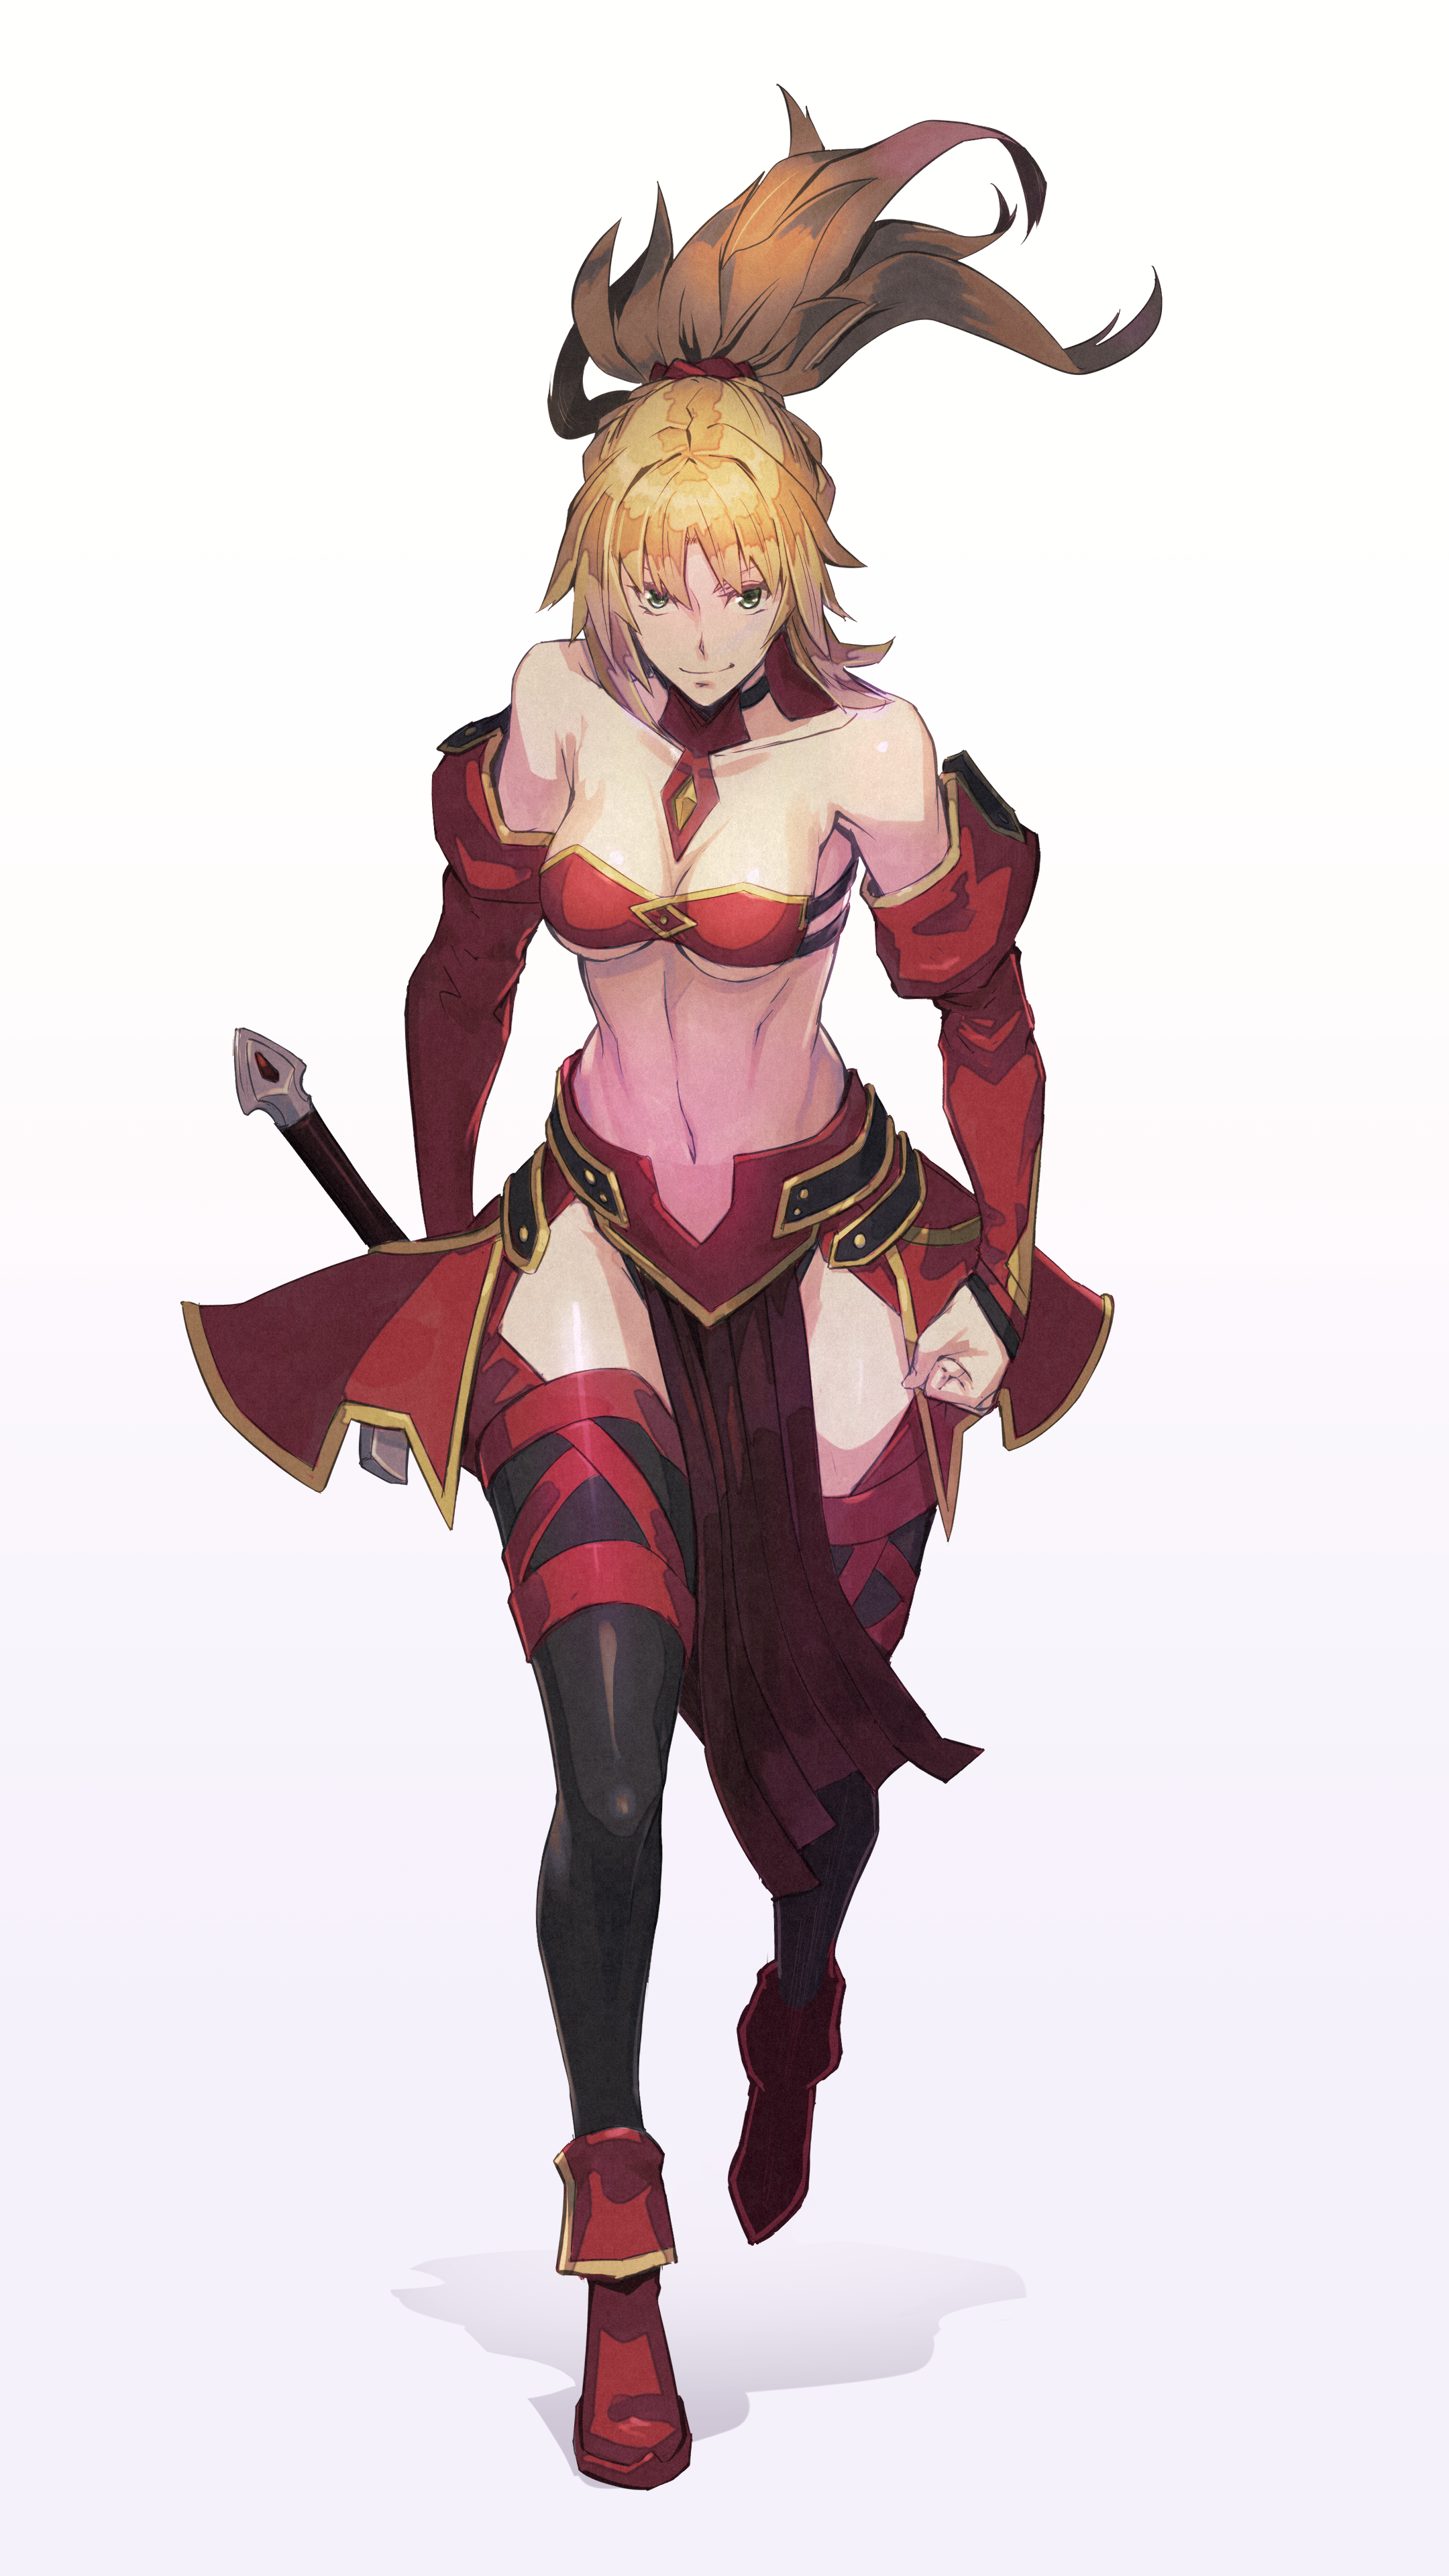 long hair, ponytail, women with swords, thighs, small boobs, cleavage,  biceps, abs, 6-pack, smiling, curvy, green eyes, looking at viewer, blonde,  Fate series, Fate/Grand Order, Fate/Apocrypha , anime girls, female  warrior, no